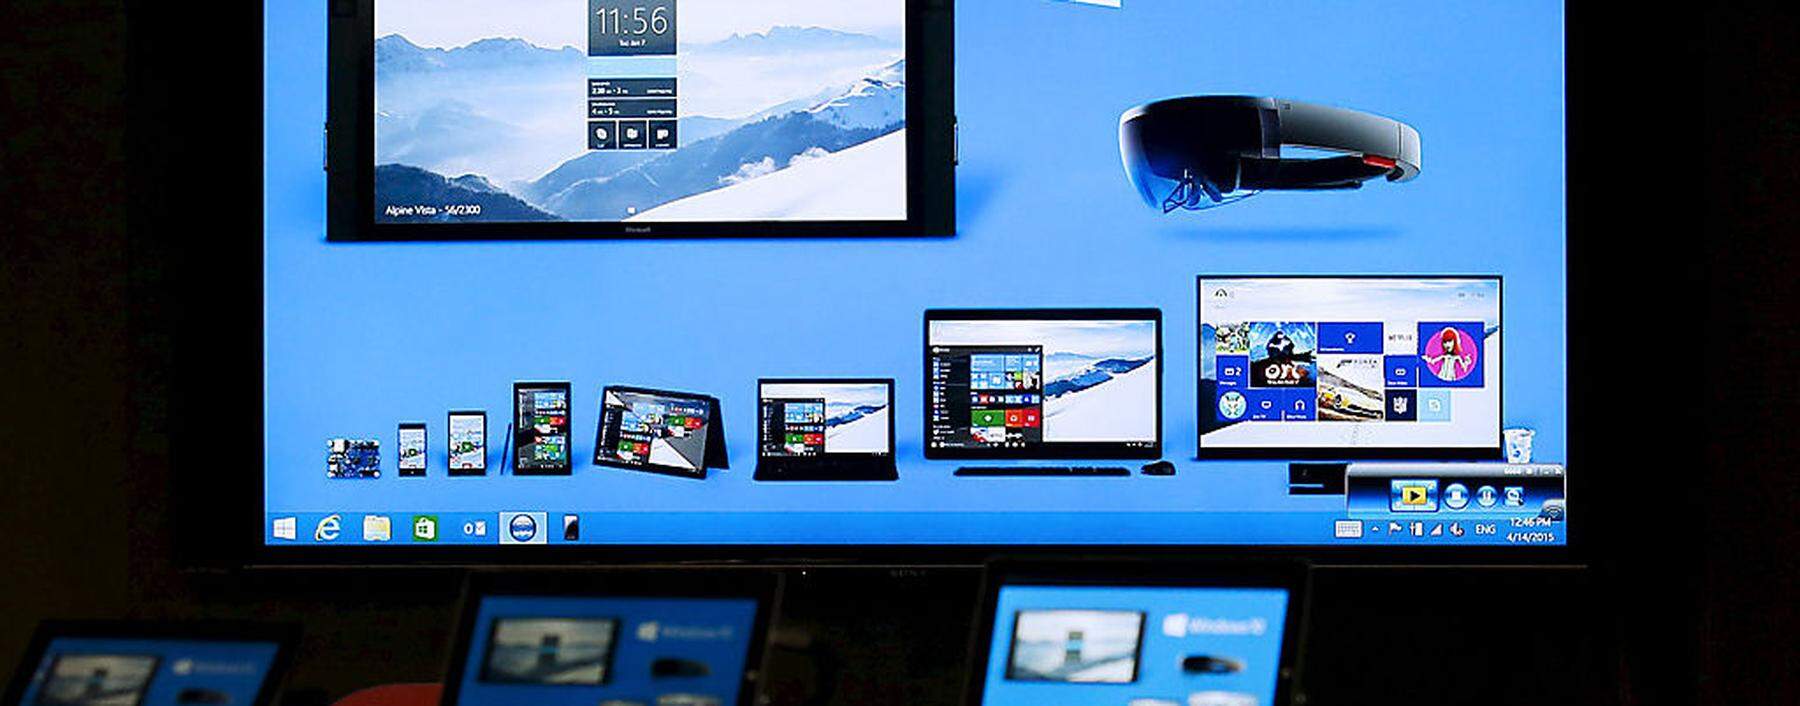 Windows 10 installed devices are displayed at Microsoft China Center One in Beijing